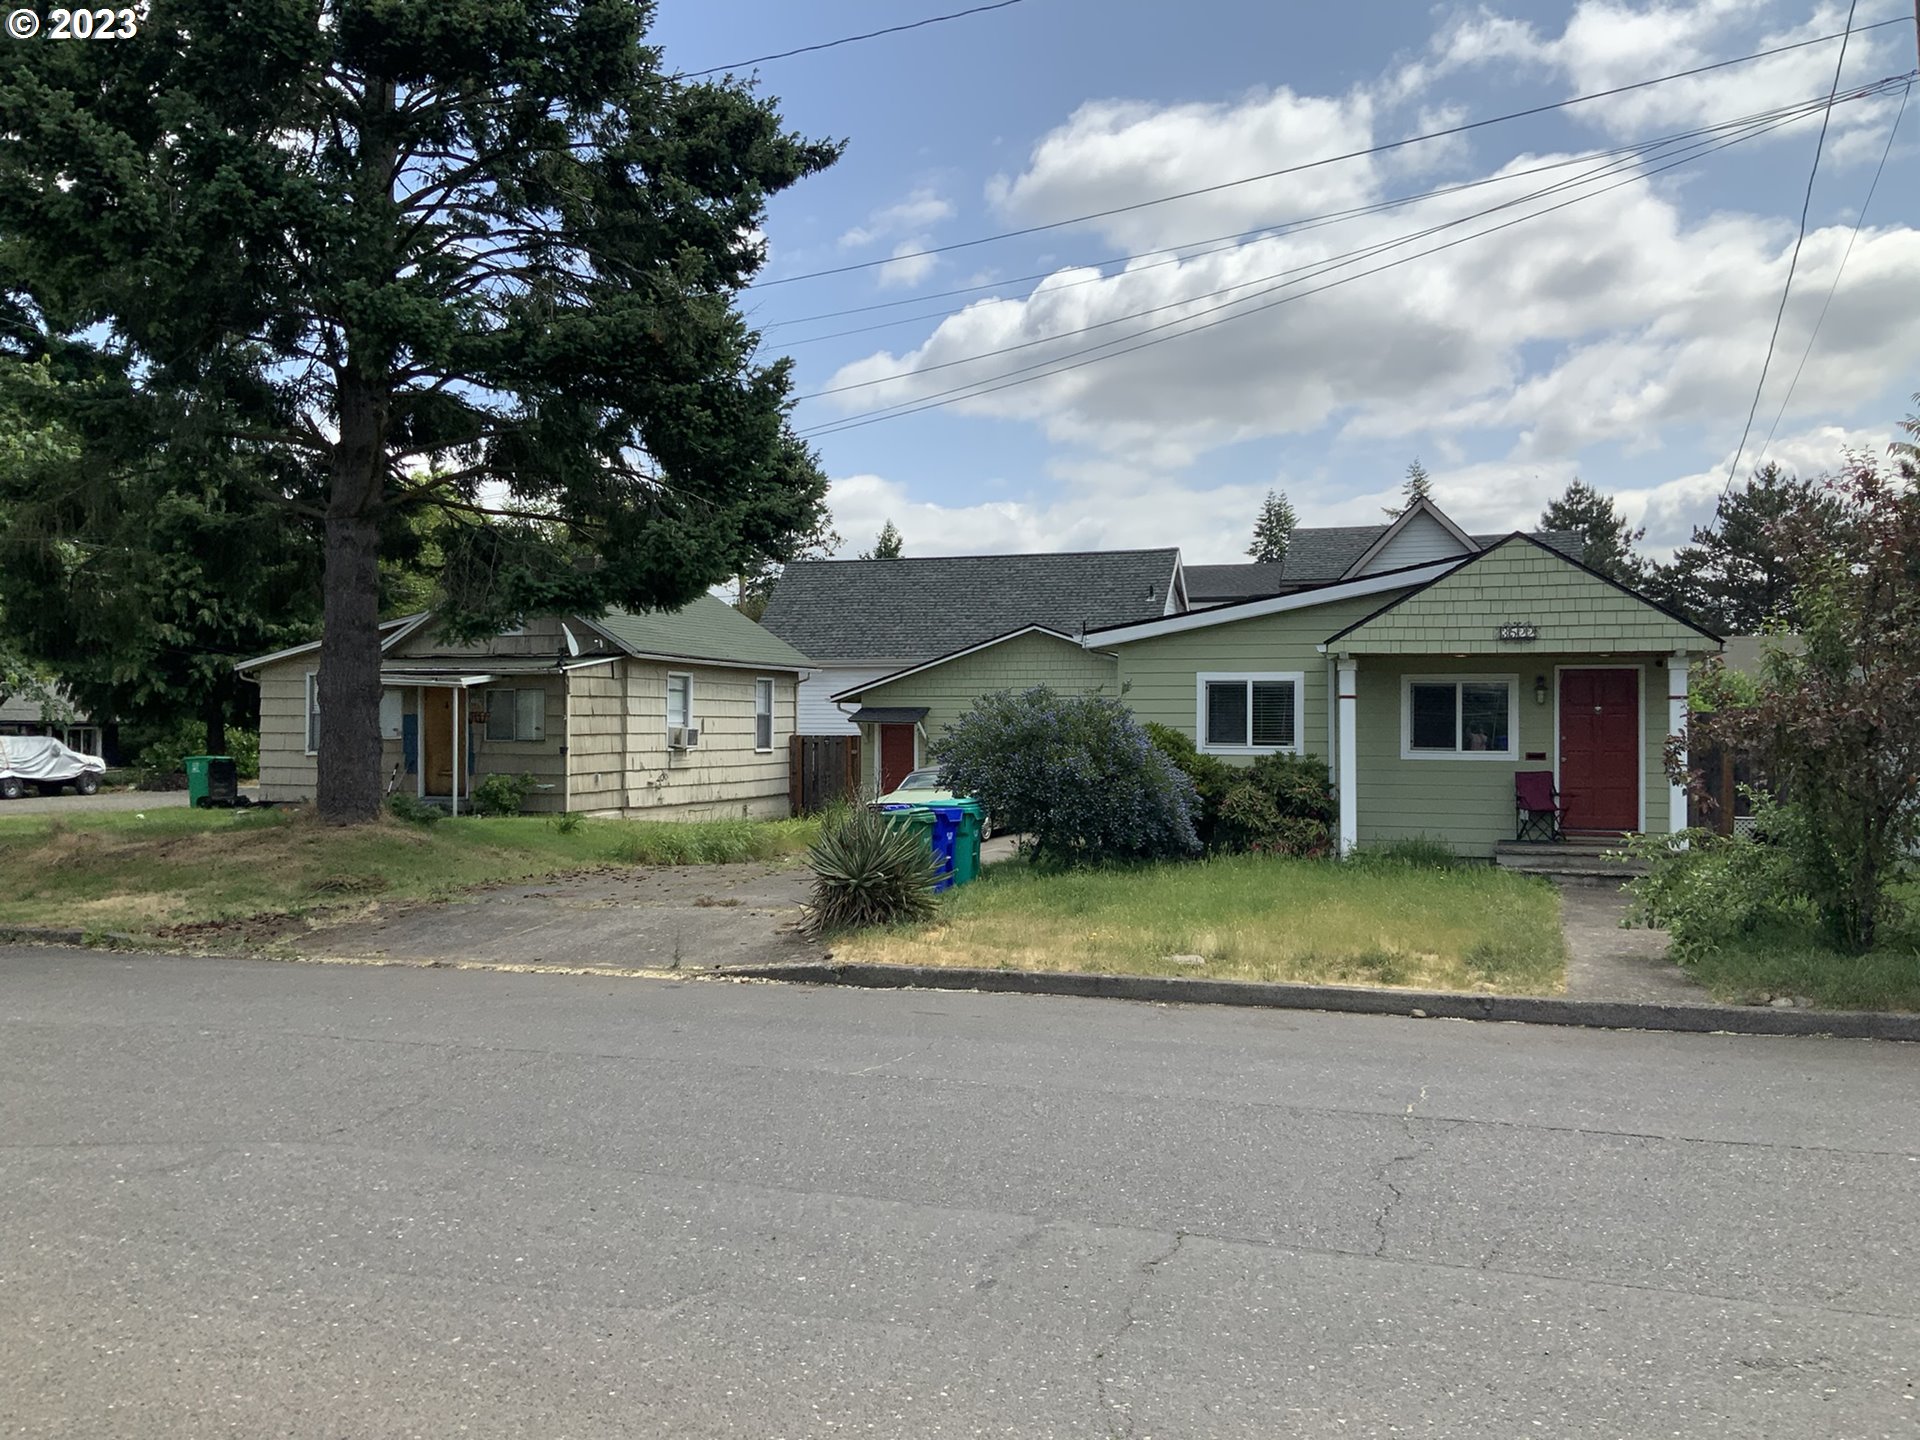 One lot, 2 dwellings. Listing info is for house @3522 NE 61st Ave. Current occupant is on a lease through 02/01/2024. ($2175) Adjacent house @3538 NE 61st Ave is 560 sf with 1 bed/1 bath and leased ($1350) through 1/8/2024. Great opportunity to have two rental properties or live in one and draw income from the other.Some upgrades have been done to both houses. Water heaters are newer, flooring, most appliances, some windows...garage to main house (3522) has a half bath.Showings require a minimum 24hour advance notice prior to appointment time. Contact Lorilei Ritmiller directly. No disturbing tenants or walking the outer perimeter without Sellers Broker present.